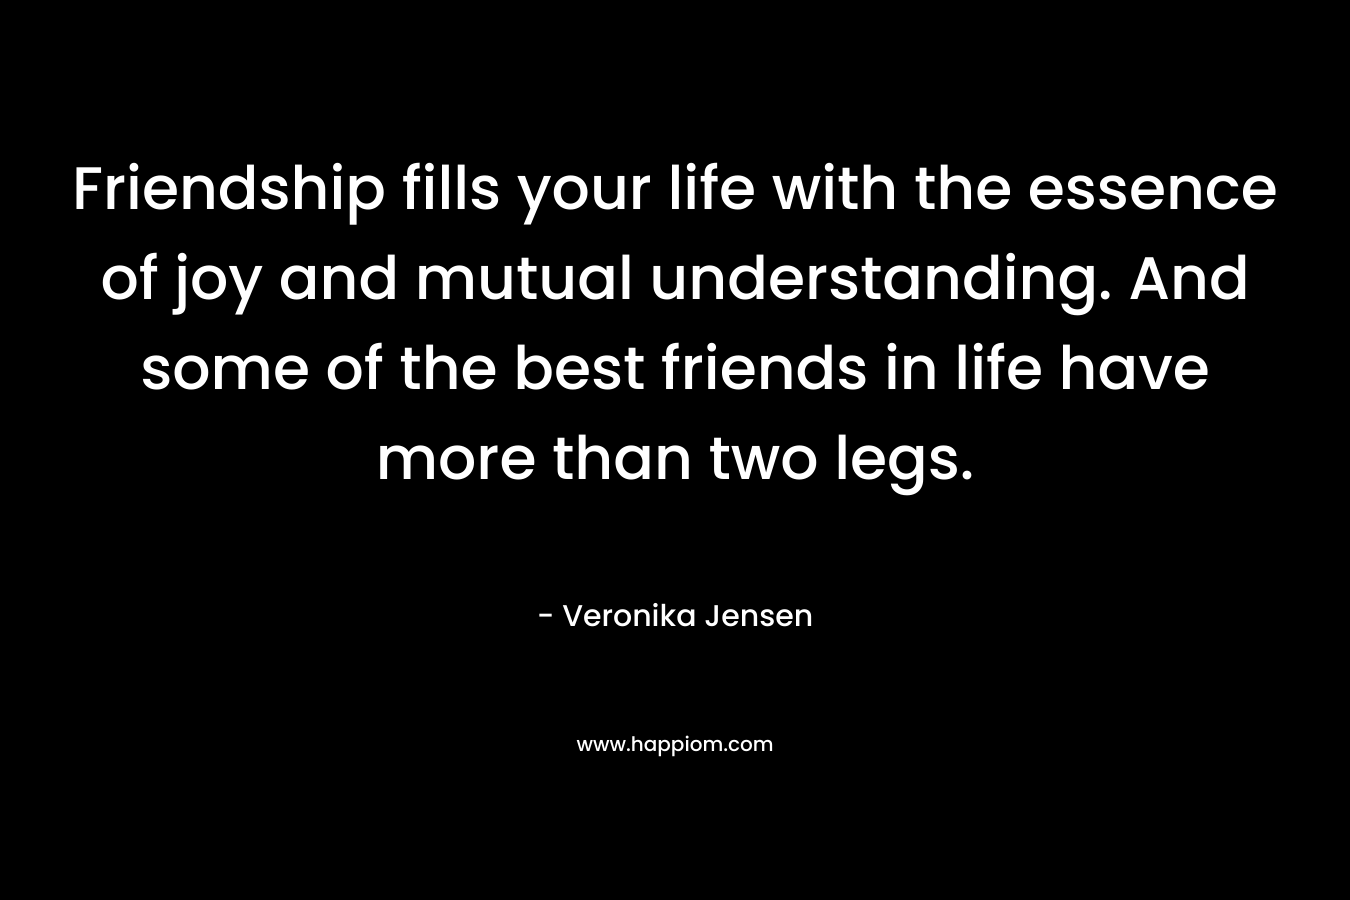 Friendship fills your life with the essence of joy and mutual understanding. And some of the best friends in life have more than two legs. – Veronika Jensen